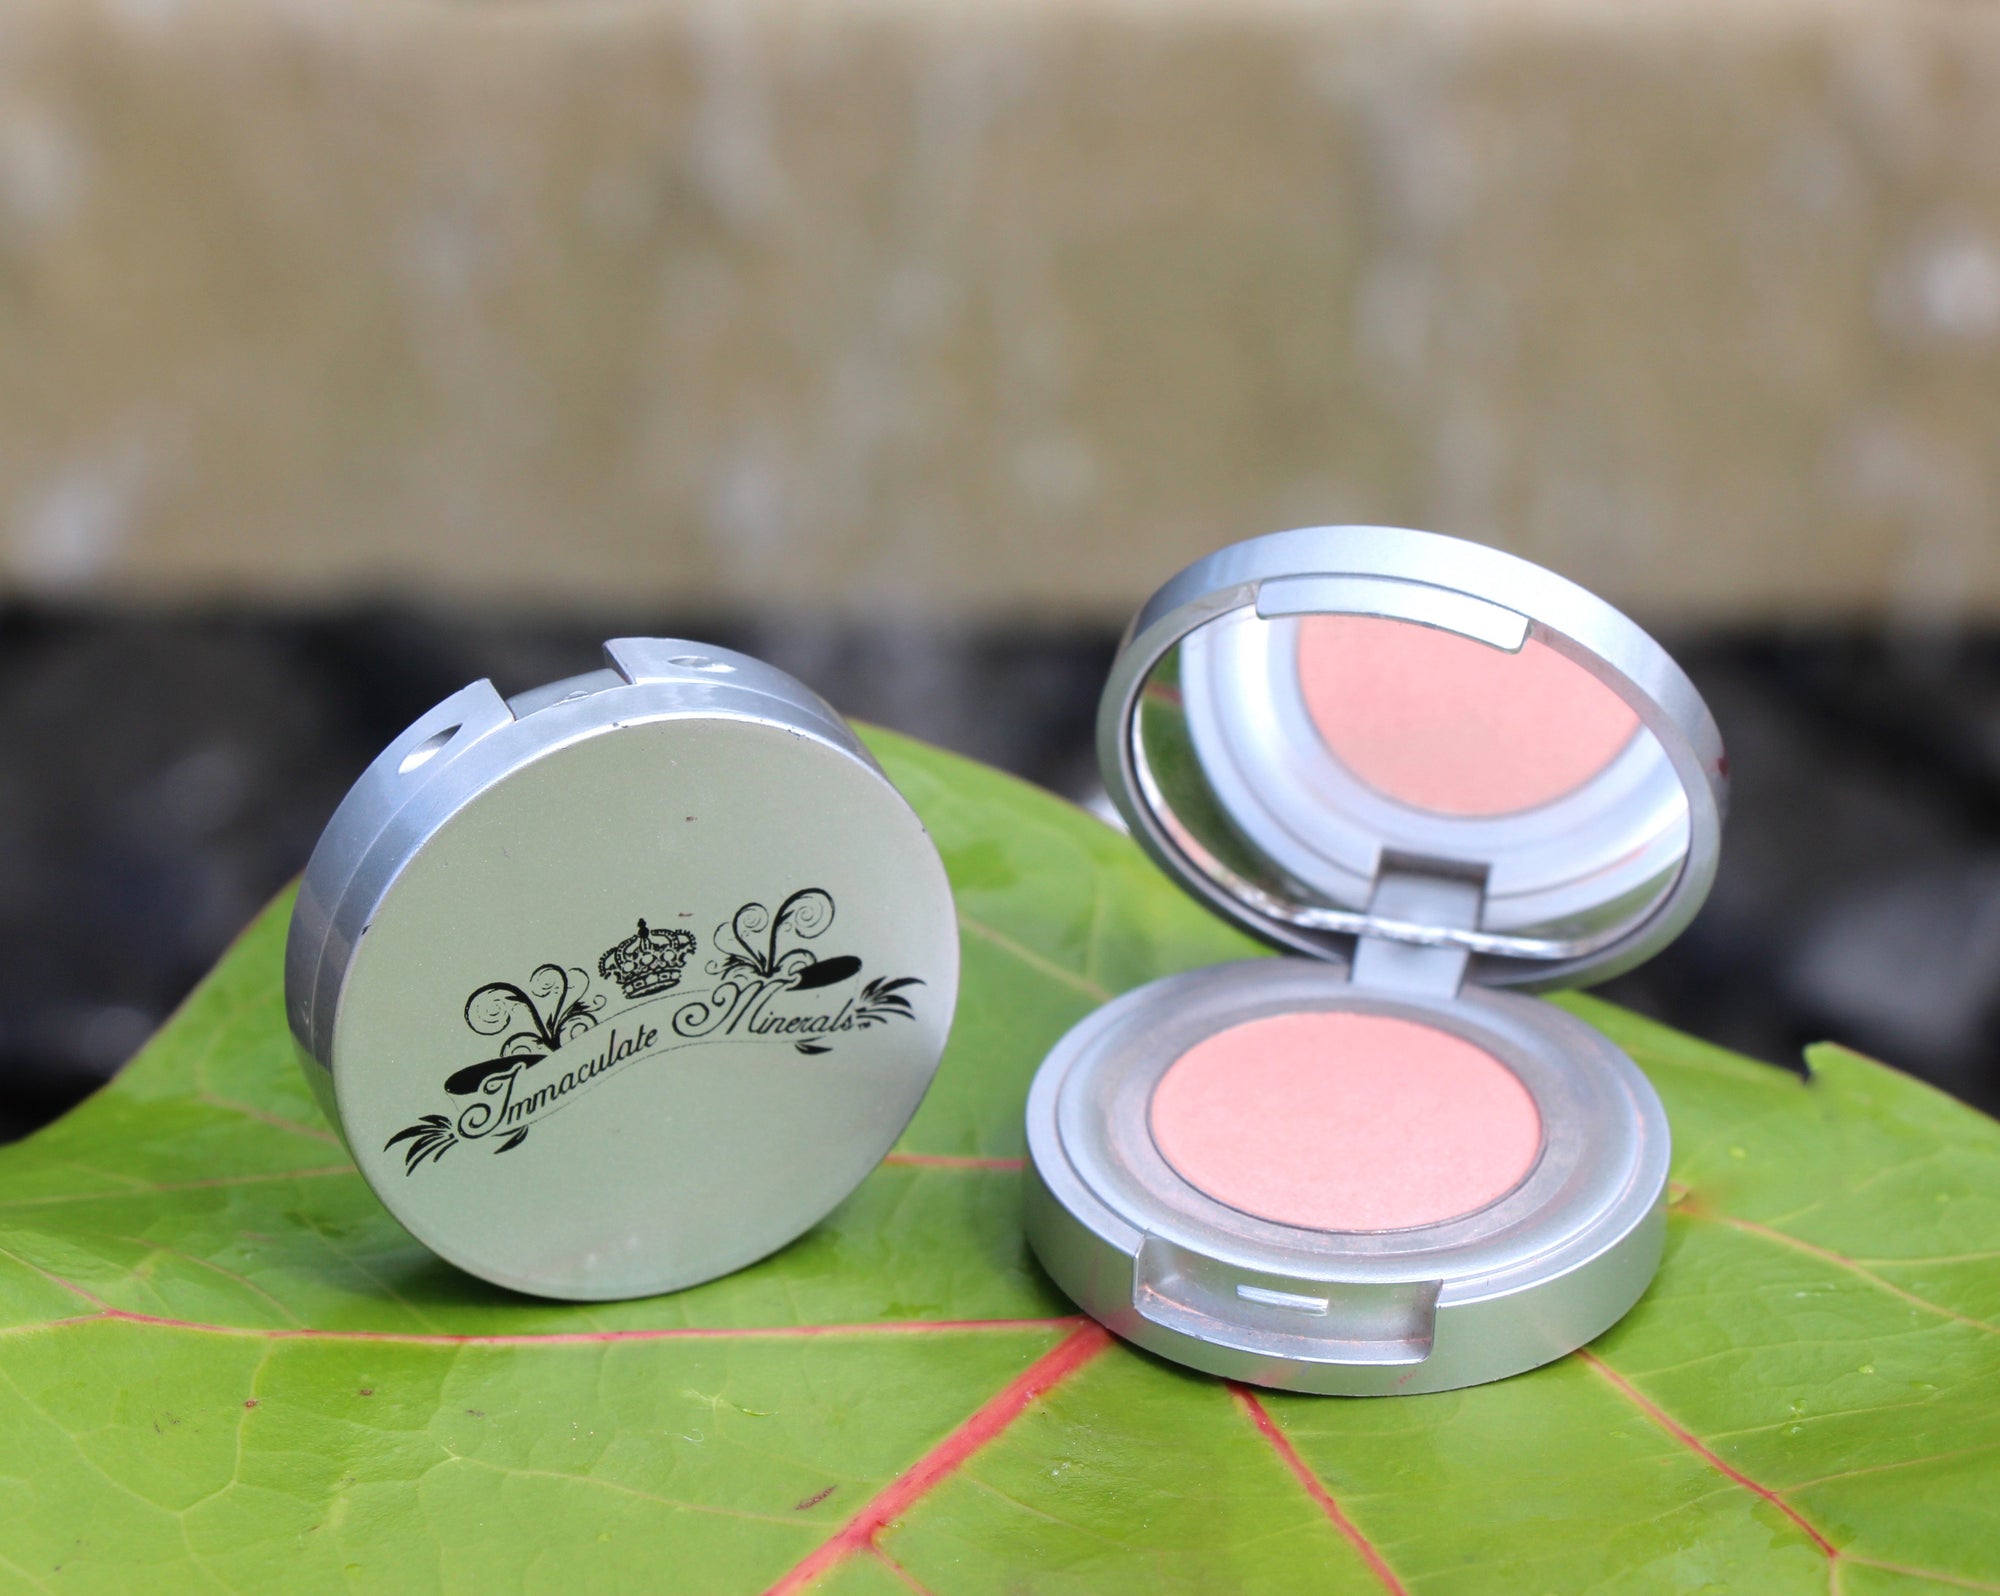 COUTURE MINERAL LUMINOUS EYESHADOW (Refillable) - Images by Miriam® 